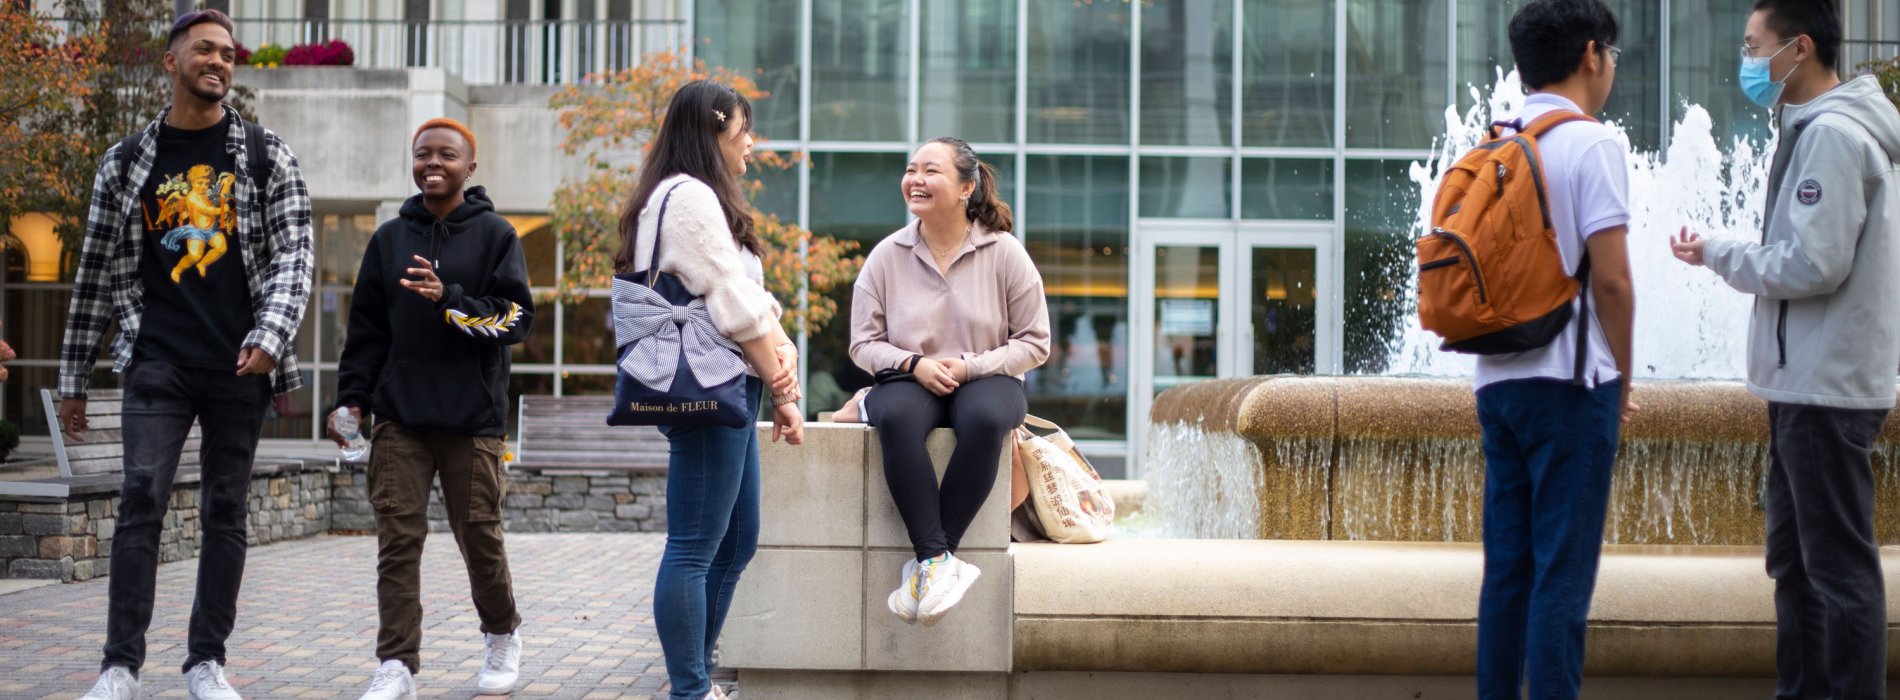 Six students gather outside on campus, speaking and smiling in pairs. Two are walking, three are standing and one is sitting.